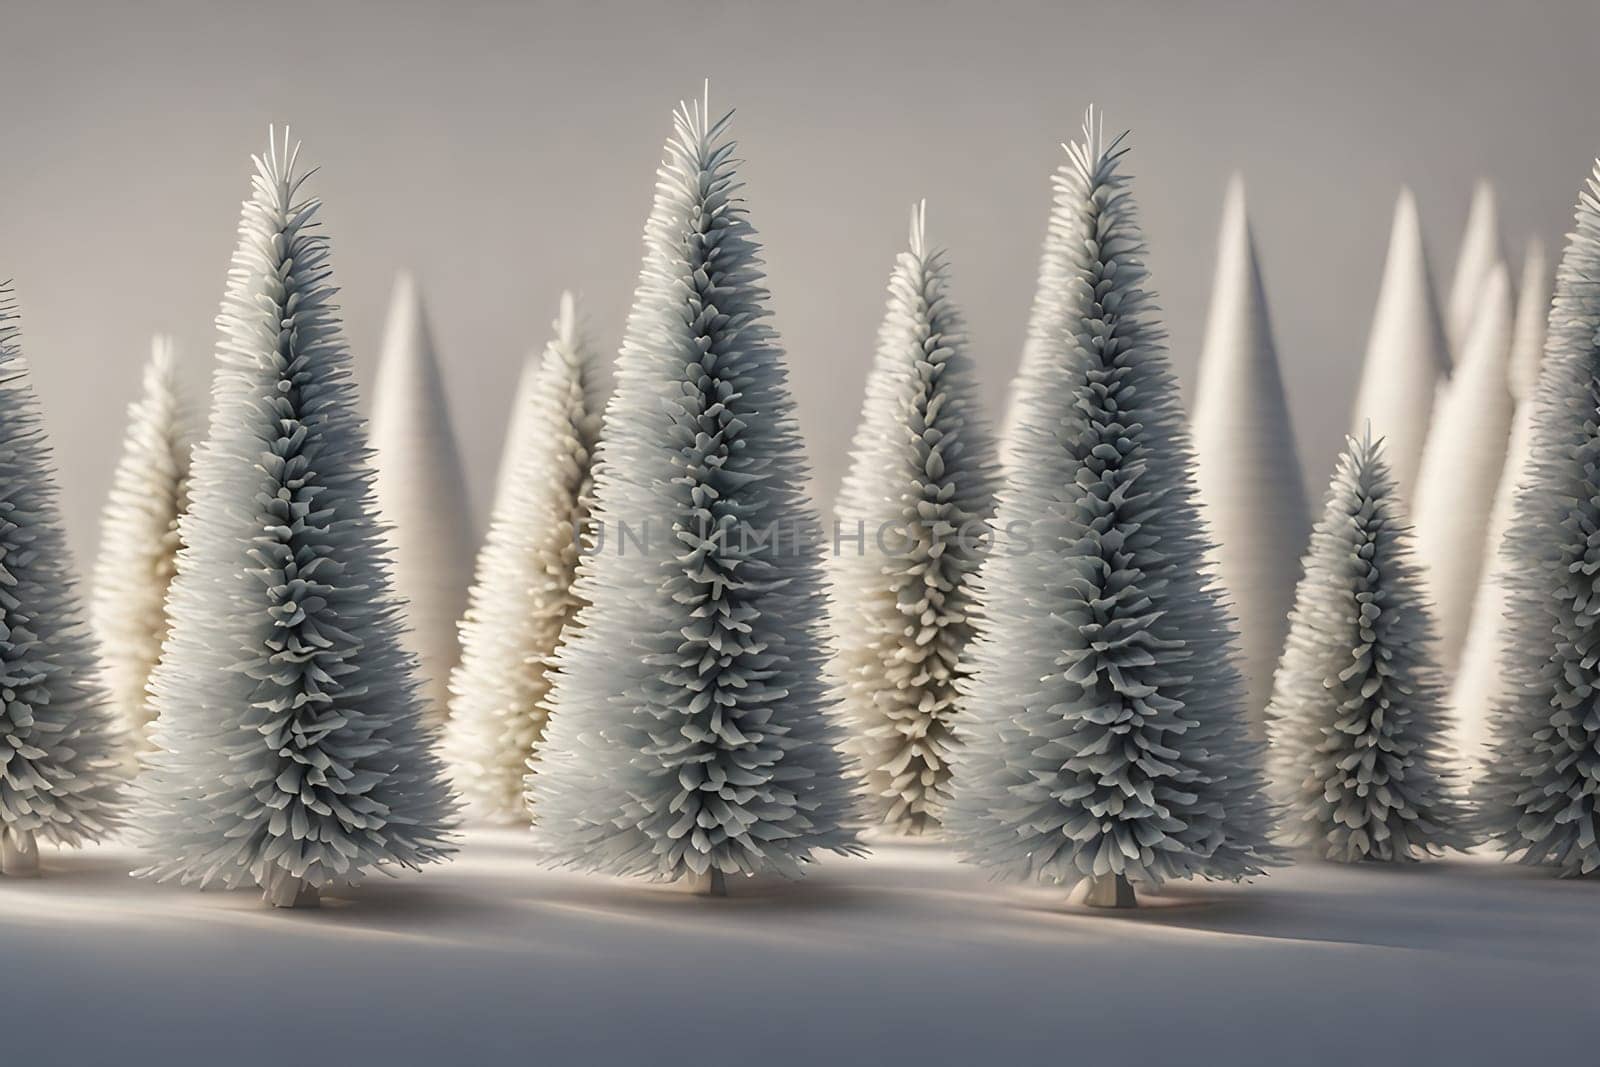 3D render of artificial Christmas trees in the snow. Winter landscape.